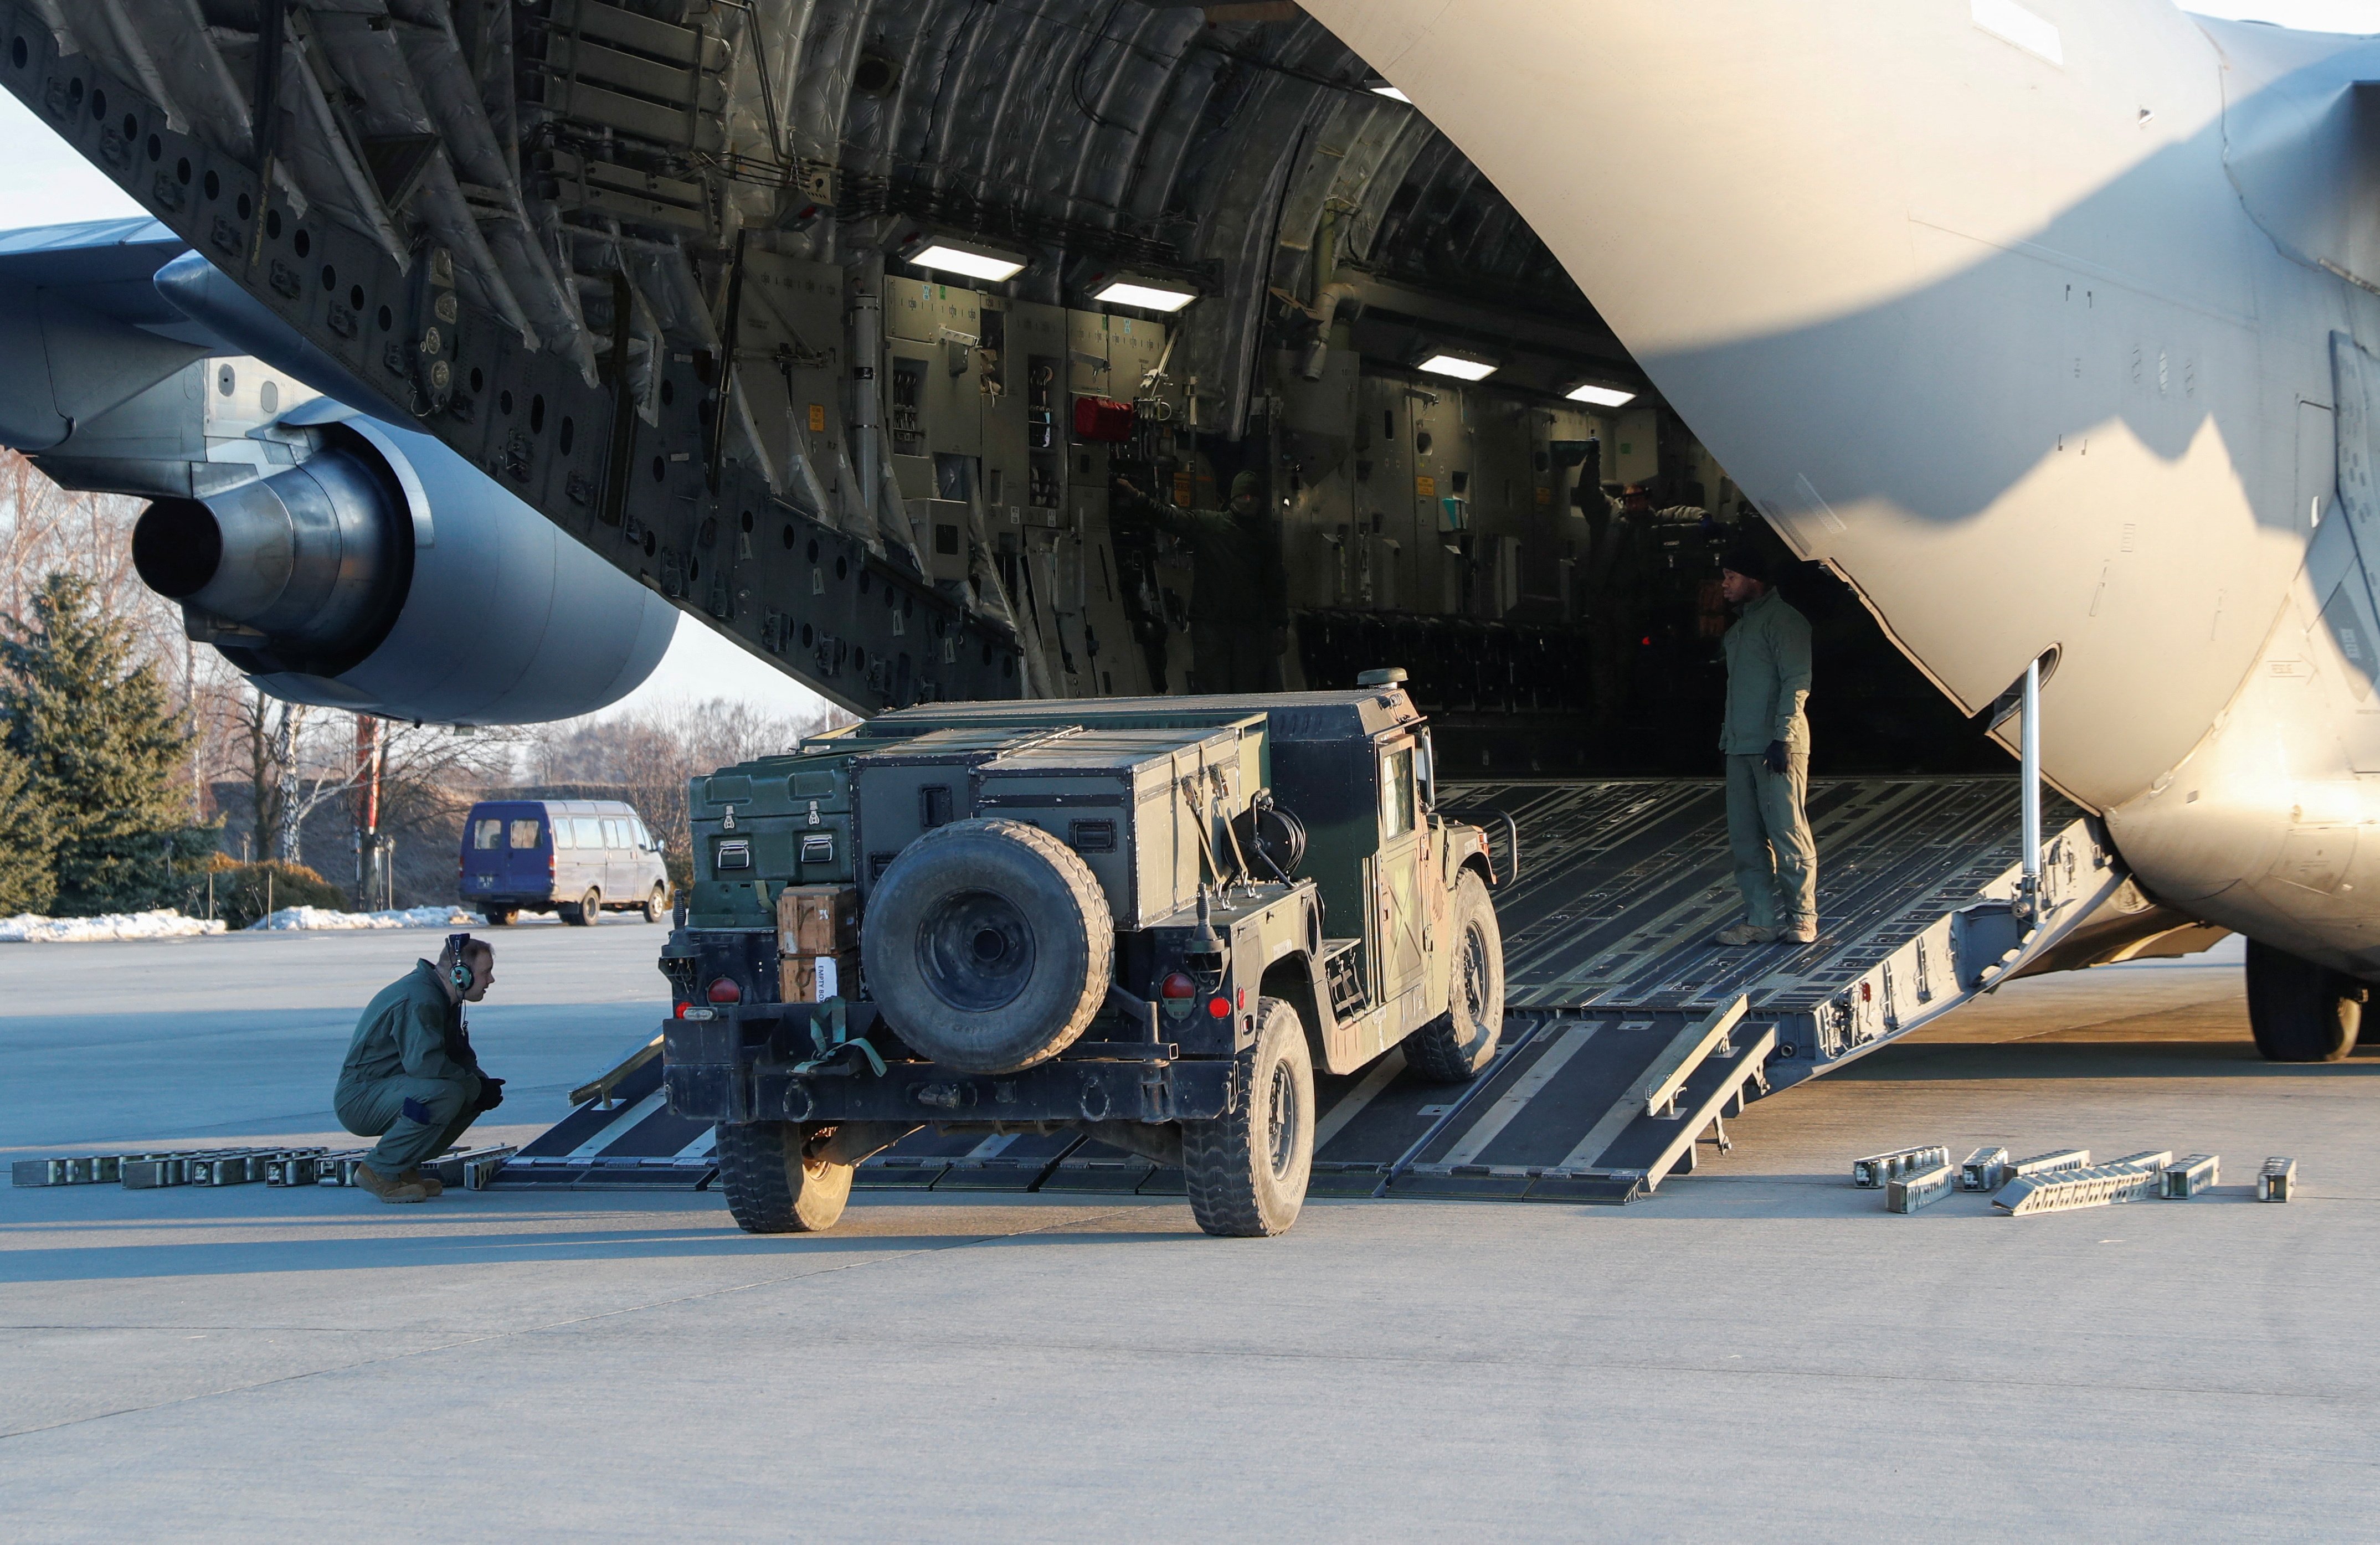 Ukraine receives shipment of Lithuania's military aid at an airport outside Kyiv